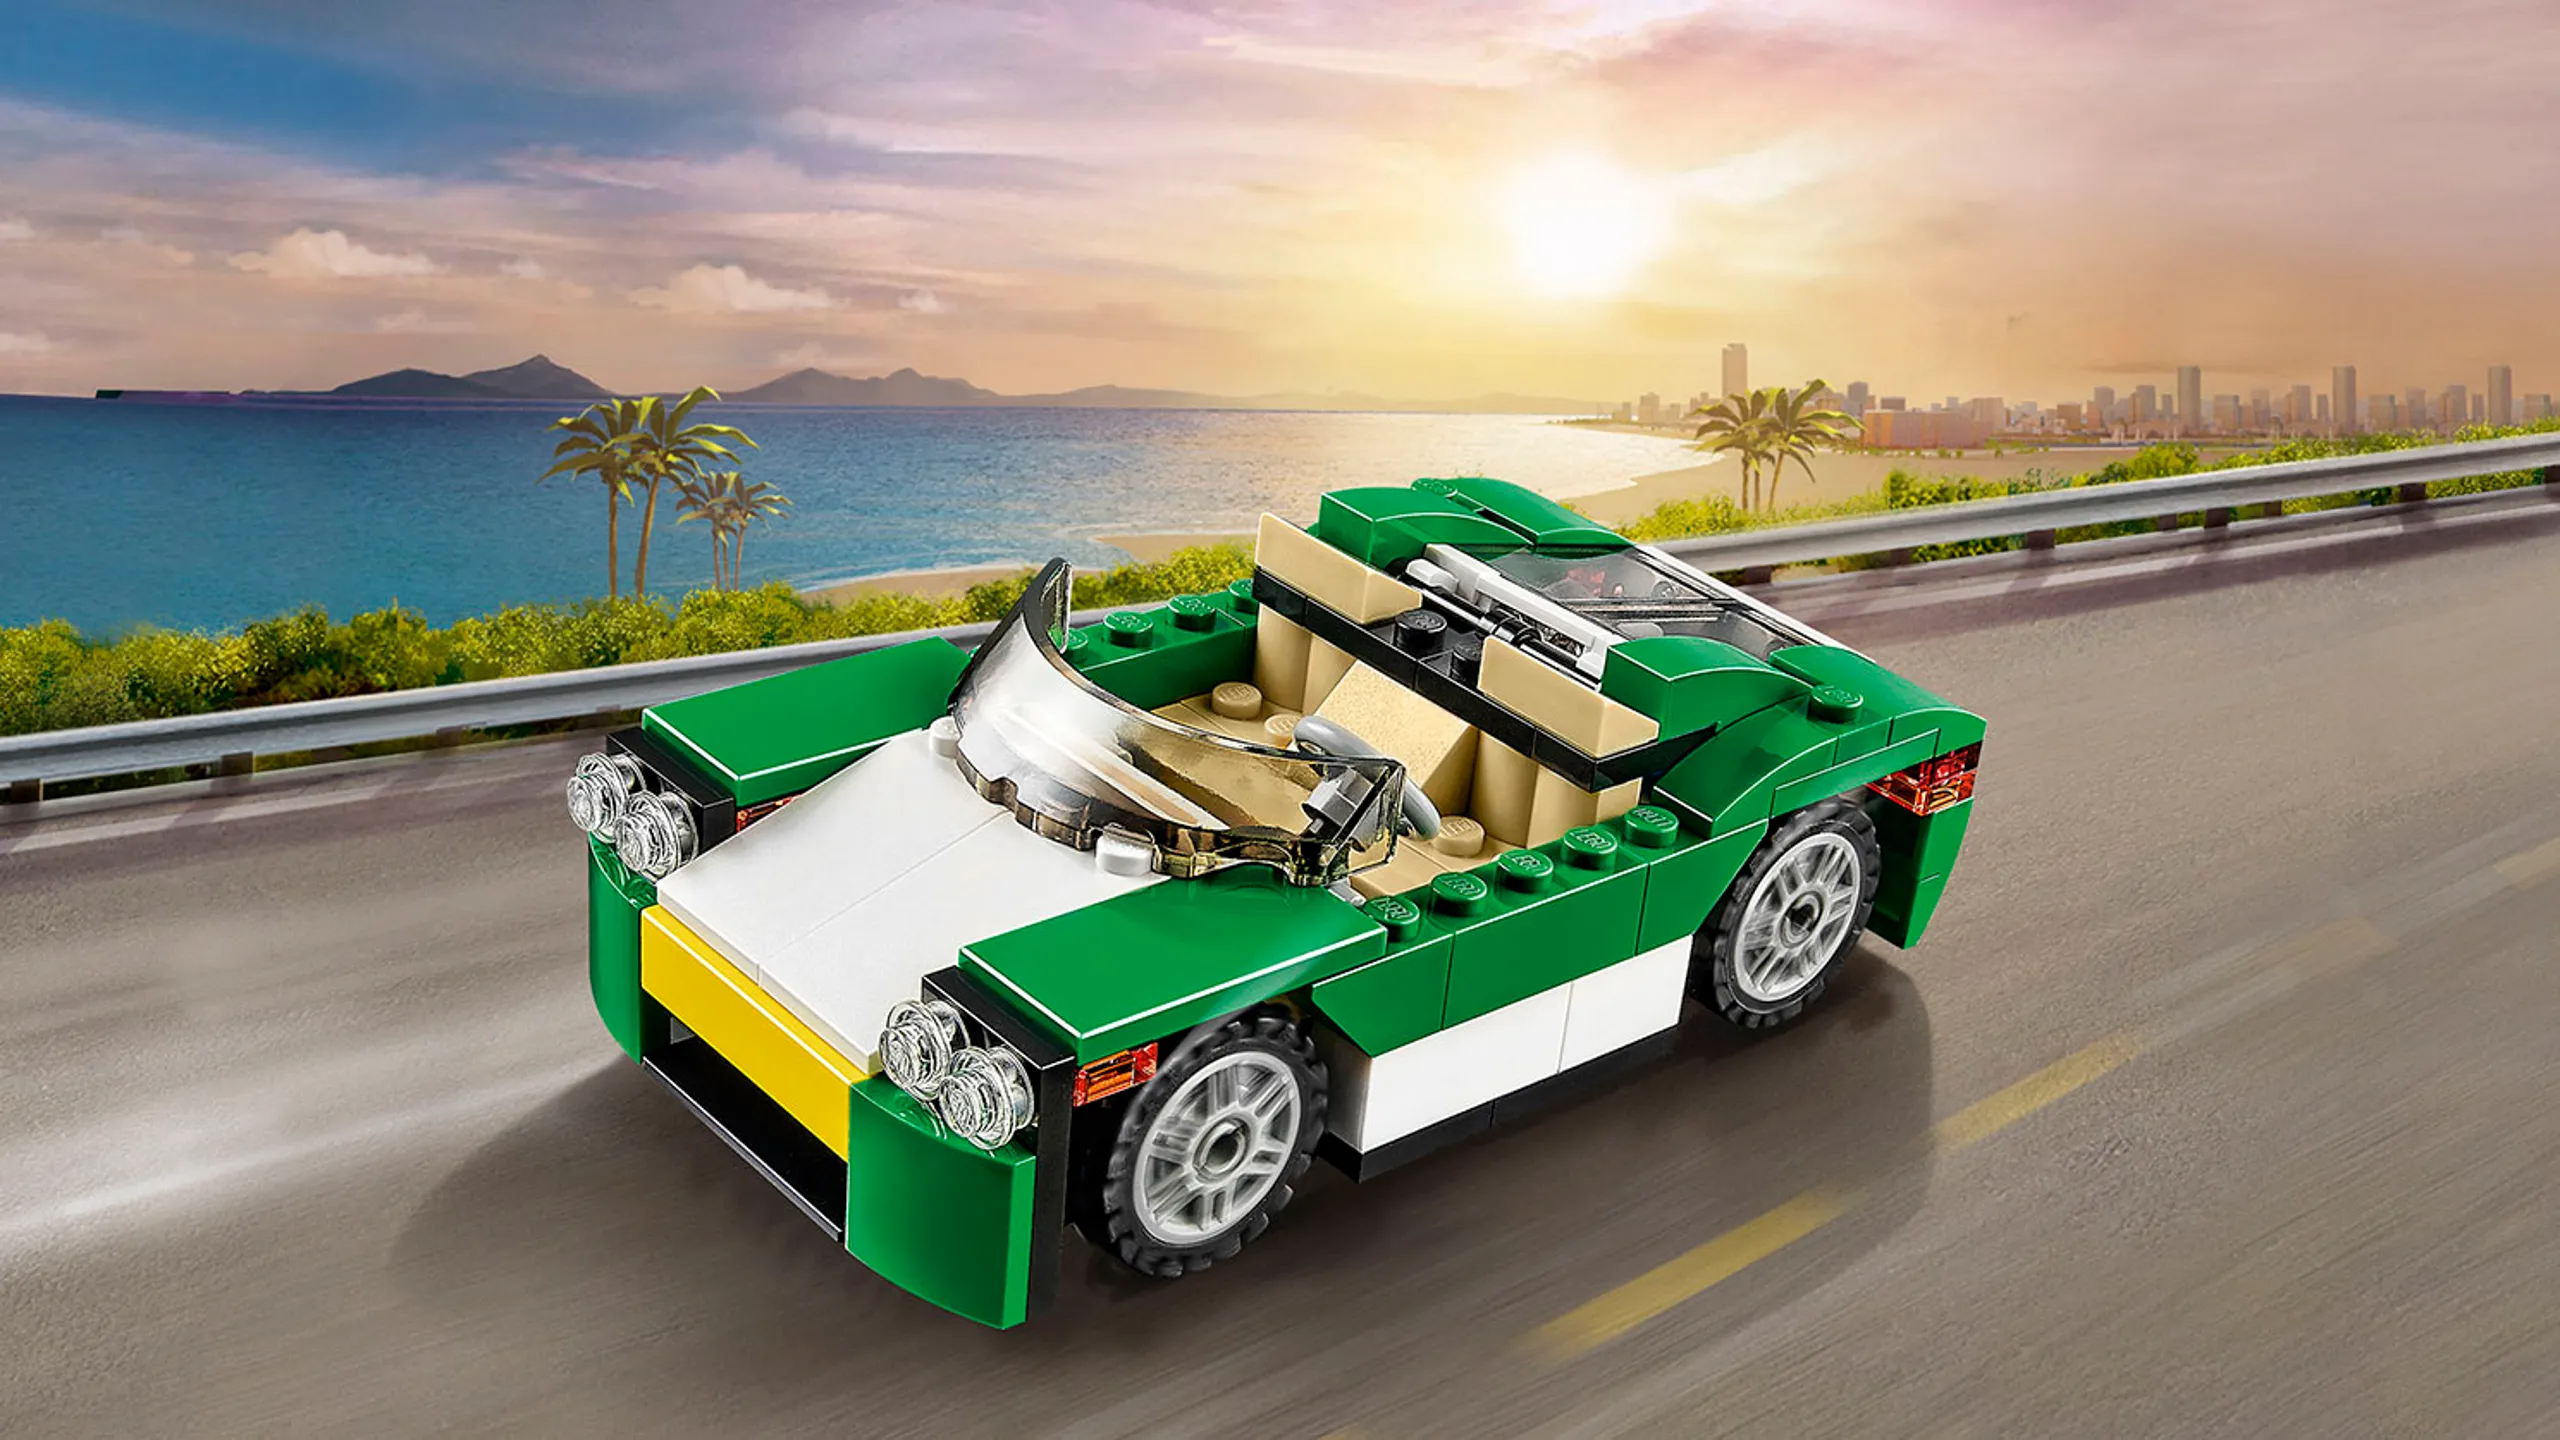 LEGO Creator 3 in 1 - 31056 Green Cruiser - Race into the sunset with the green cruiser.